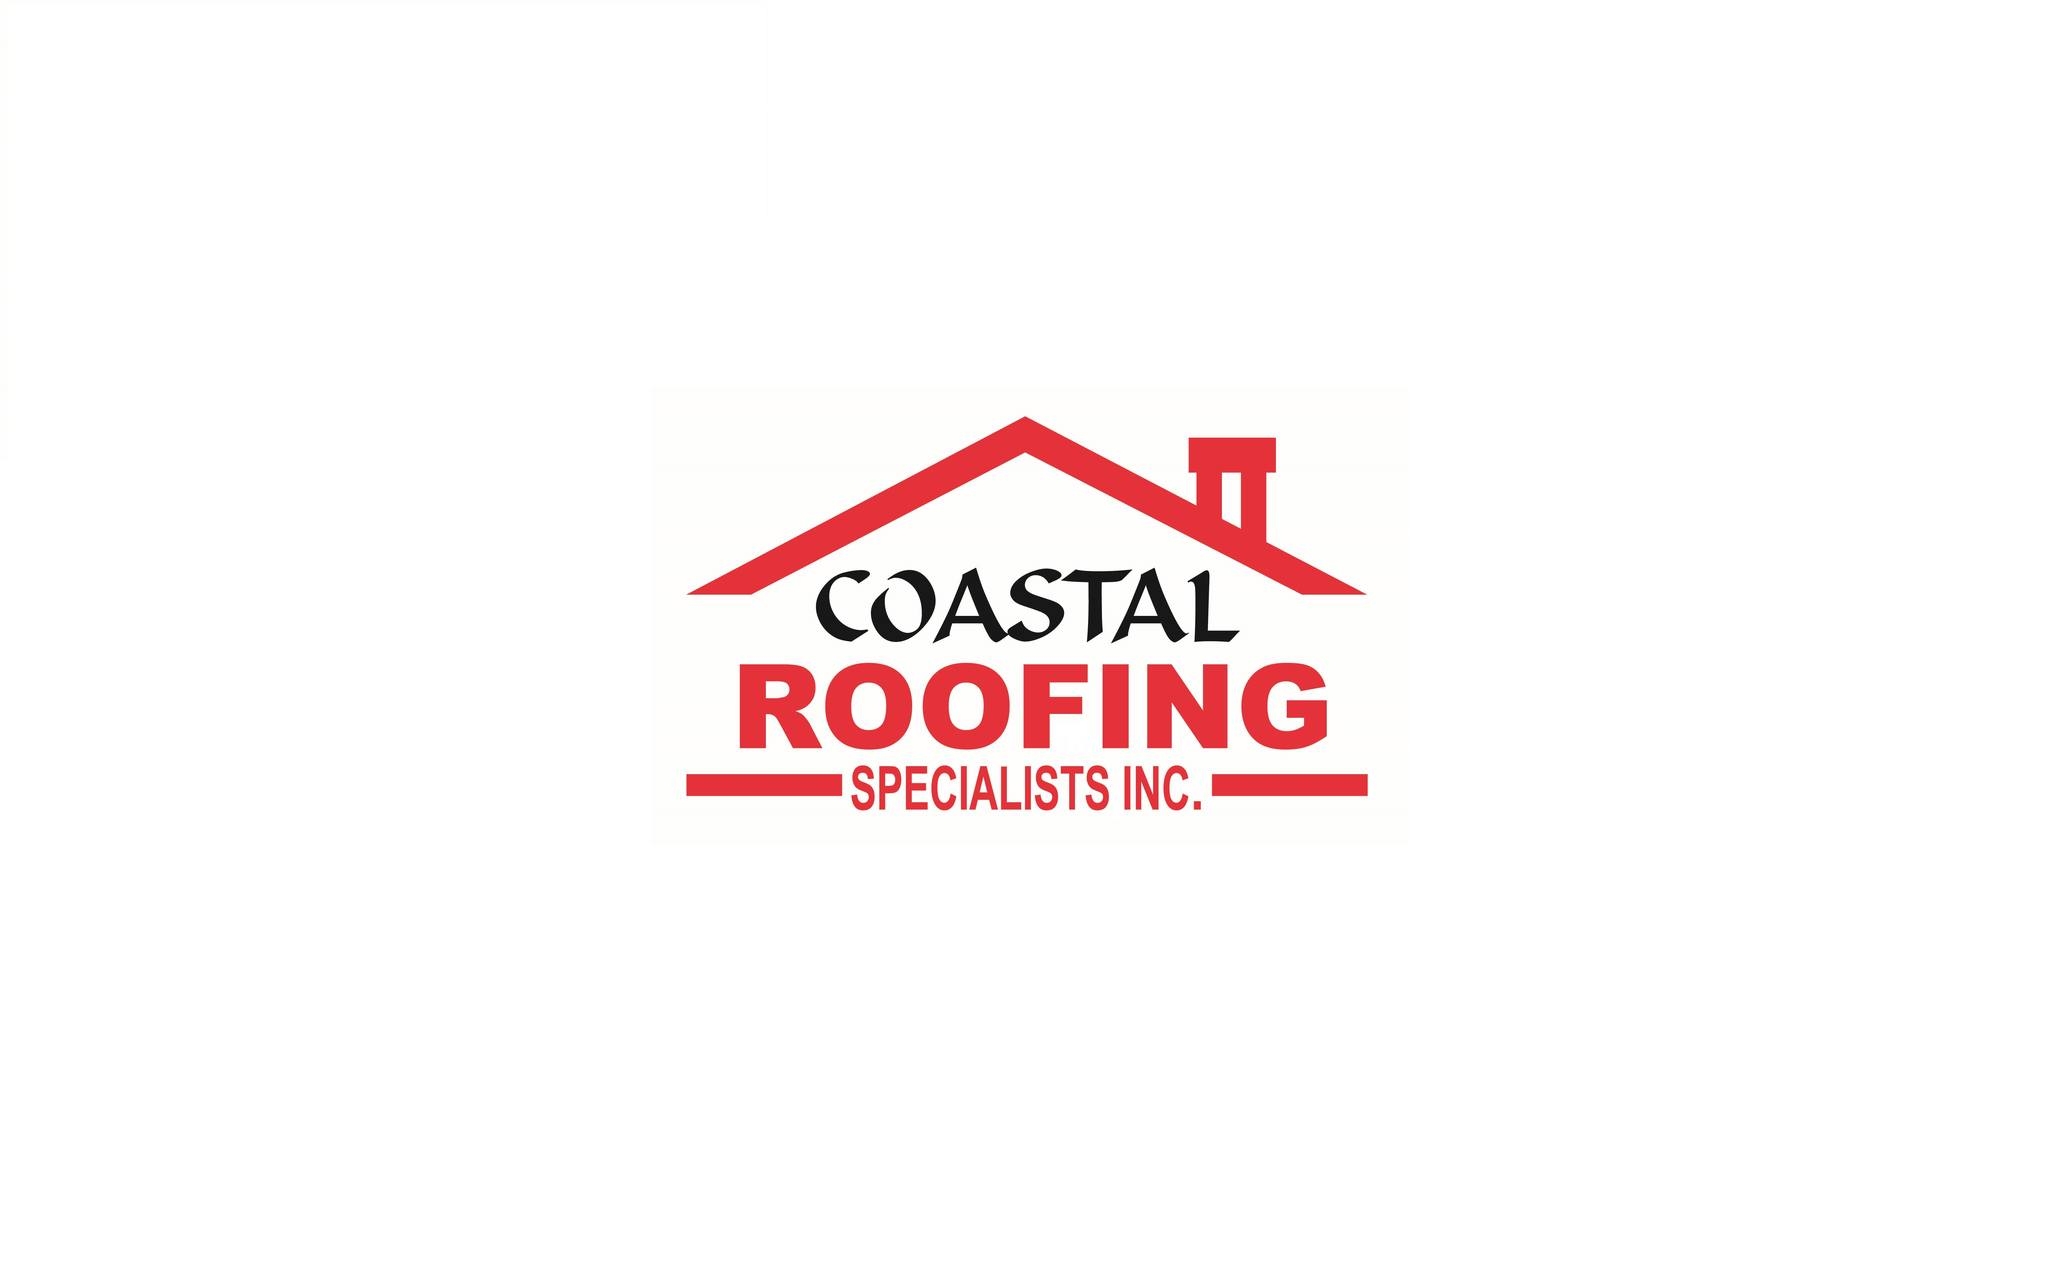 Coastal Roofing Specialists, Inc.